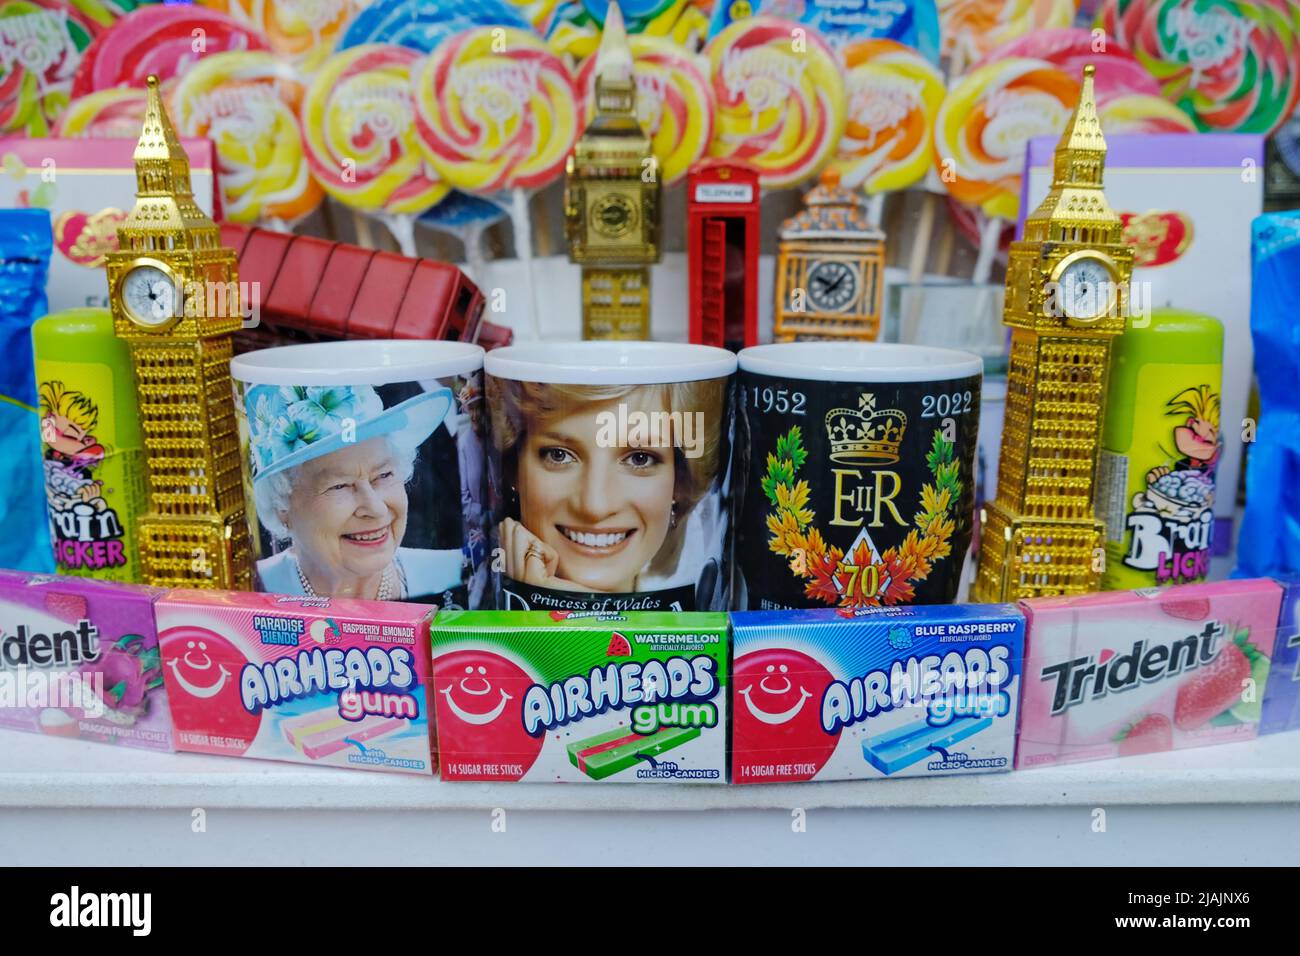 London, UK. A window display in an 'American candy store' in Oxford Street, with sweets and British themed souvenirs Stock Photo